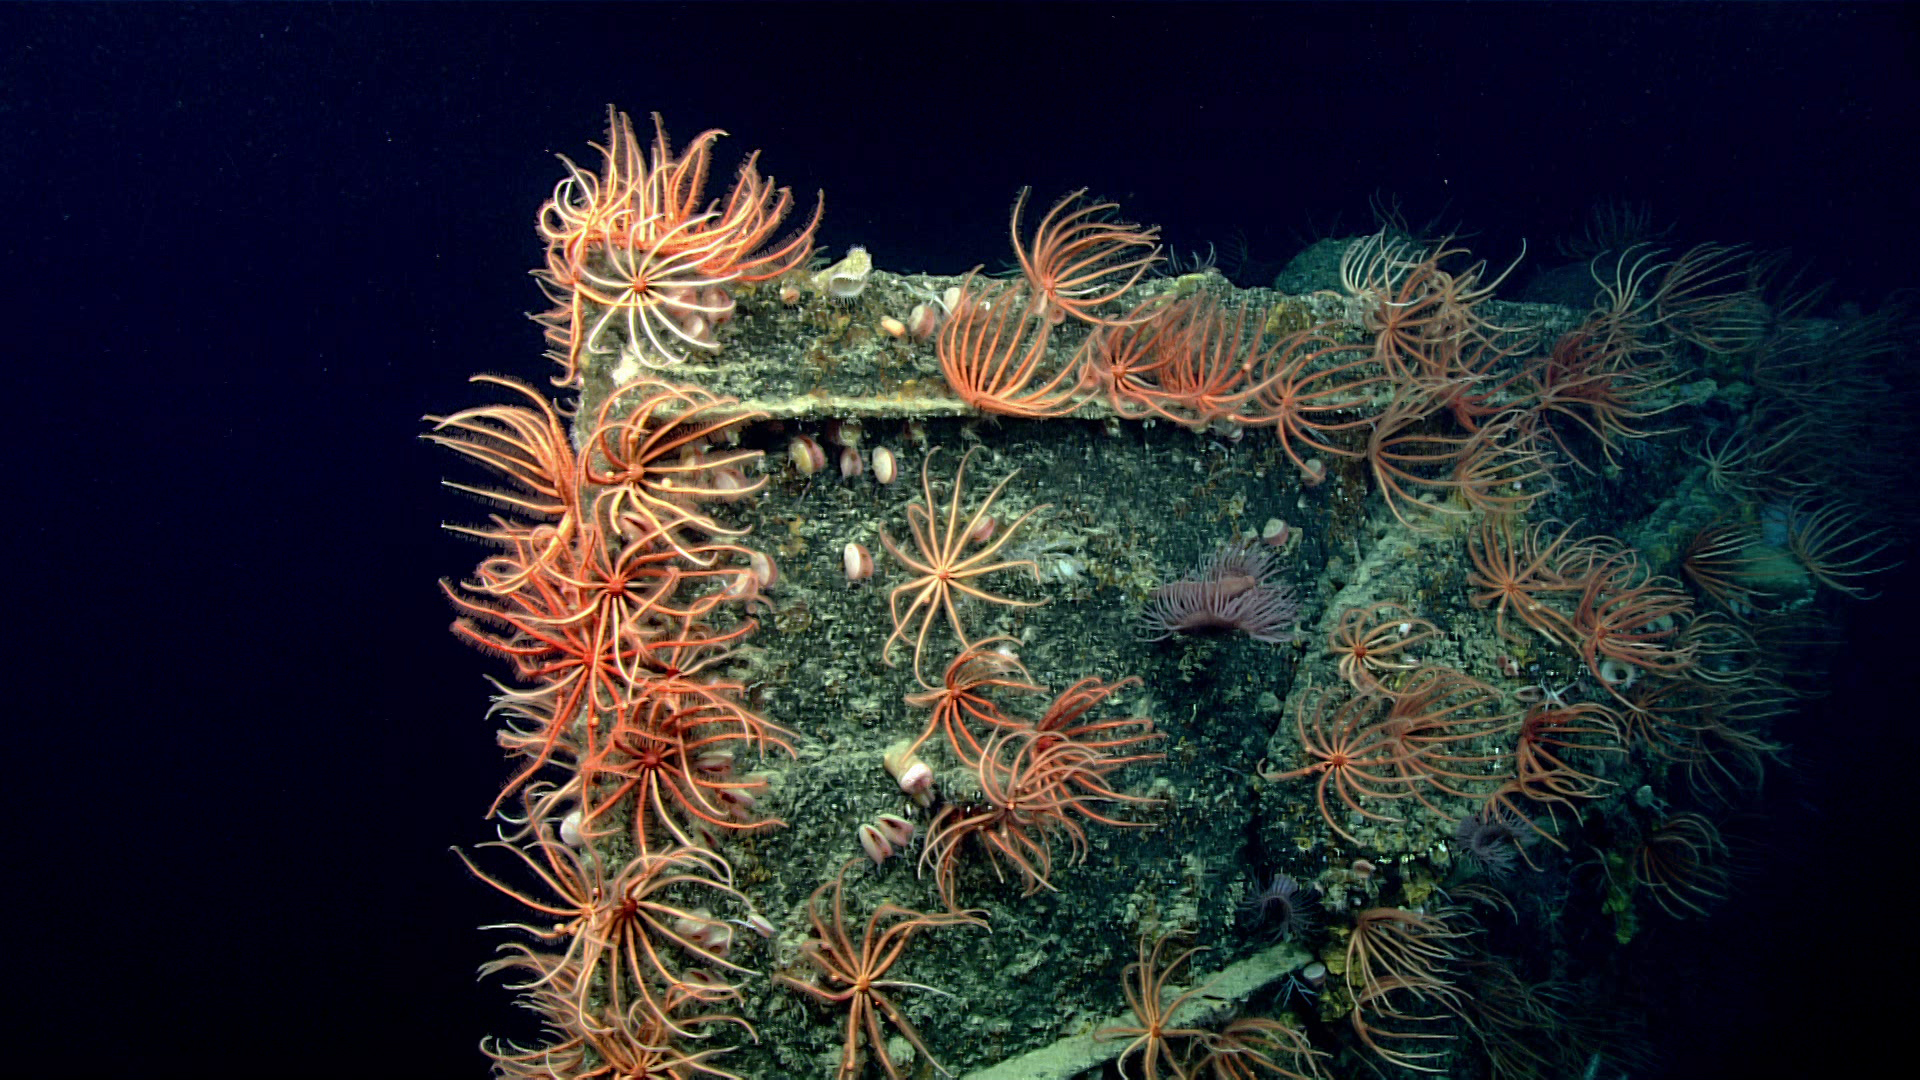 This view of the USS Baltimore foredeck shows the forecastle and upper hull strakes have been removed, likely to aid the scuttling of the ship. As in this photo, brisingid sea stars dominated much of the available surface on the ship.